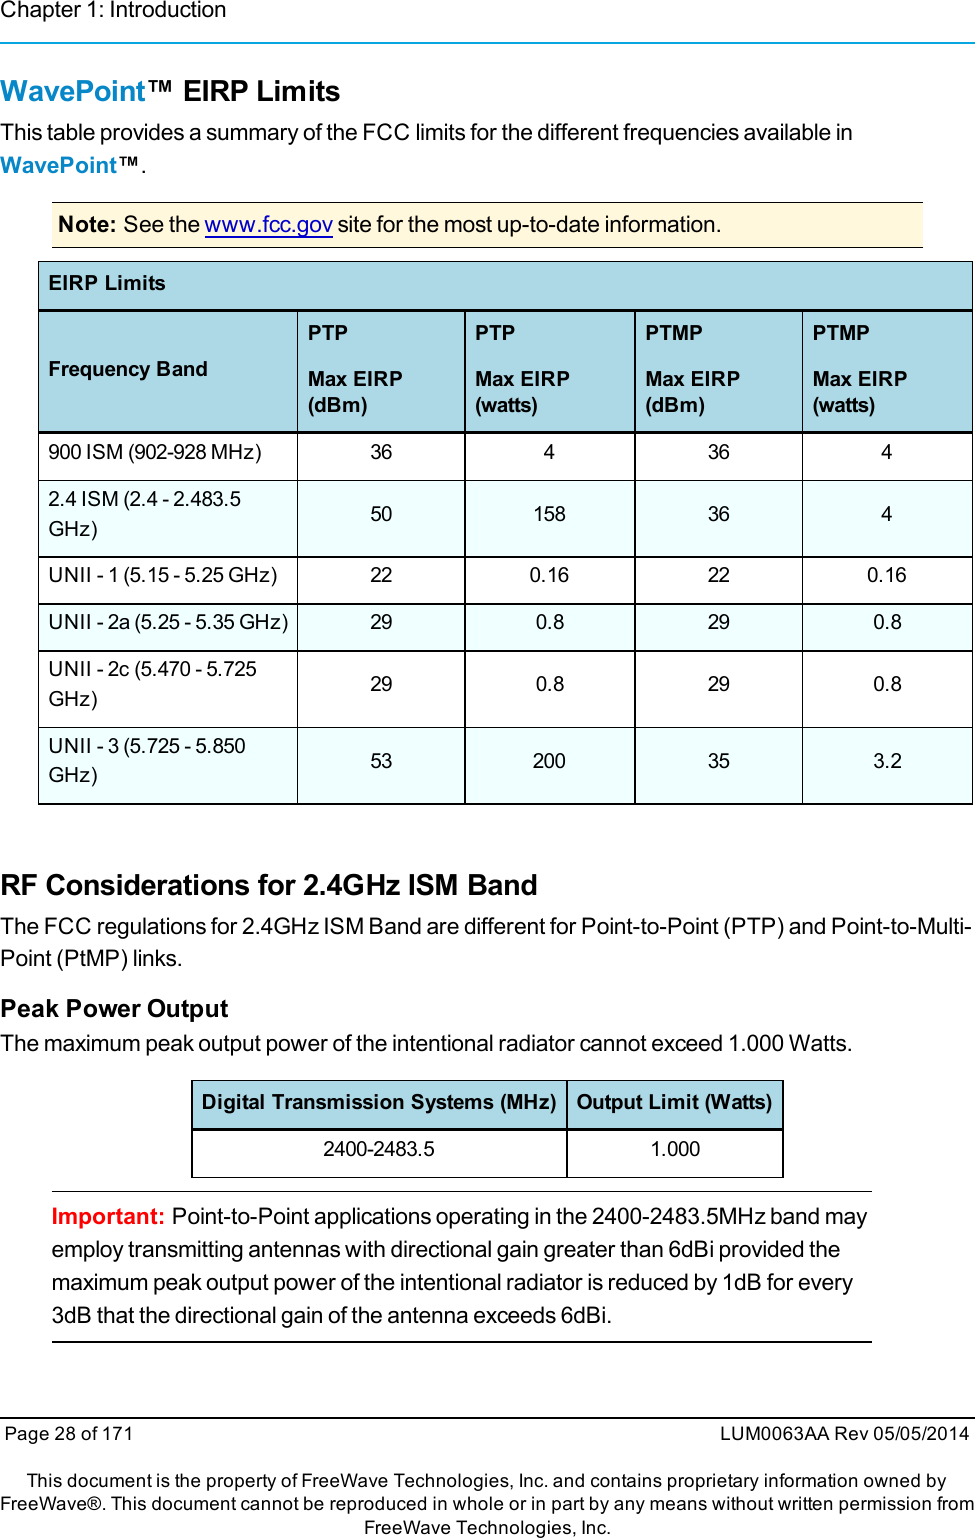 Chapter 1: IntroductionWavePoint™ EIRP LimitsThis table provides a summary of the FCC limits for the different frequencies available inWavePoint™.Note: See the www.fcc.gov site for the most up-to-date information.EIRP LimitsFrequency BandPTPMax EIRP(dBm)PTPMax EIRP(watts)PTMPMax EIRP(dBm)PTMPMax EIRP(watts)900 ISM (902-928 MHz) 36 4 36 42.4 ISM (2.4 - 2.483.5GHz) 50 158 36 4UNII - 1 (5.15 - 5.25 GHz) 22 0.16 22 0.16UNII - 2a (5.25 - 5.35 GHz) 29 0.8 29 0.8UNII - 2c (5.470 - 5.725GHz) 29 0.8 29 0.8UNII - 3 (5.725 - 5.850GHz) 53 200 35 3.2RF Considerations for 2.4GHz ISM BandThe FCC regulations for 2.4GHz ISM Band are different for Point-to-Point (PTP) and Point-to-Multi-Point (PtMP) links.Peak Power OutputThe maximum peak output power of the intentional radiator cannot exceed 1.000 Watts.Digital Transmission Systems (MHz) Output Limit (Watts)2400-2483.5 1.000Important: Point-to-Point applications operating in the 2400-2483.5MHz band mayemploy transmitting antennas with directional gain greater than 6dBi provided themaximum peak output power of the intentional radiator is reduced by 1dB for every3dB that the directional gain of the antenna exceeds 6dBi.Page 28 of 171 LUM0063AA Rev 05/05/2014This document is the property of FreeWave Technologies, Inc. and contains proprietary information owned byFreeWave®. This document cannot be reproduced in whole or in part by any means without written permission fromFreeWave Technologies, Inc.